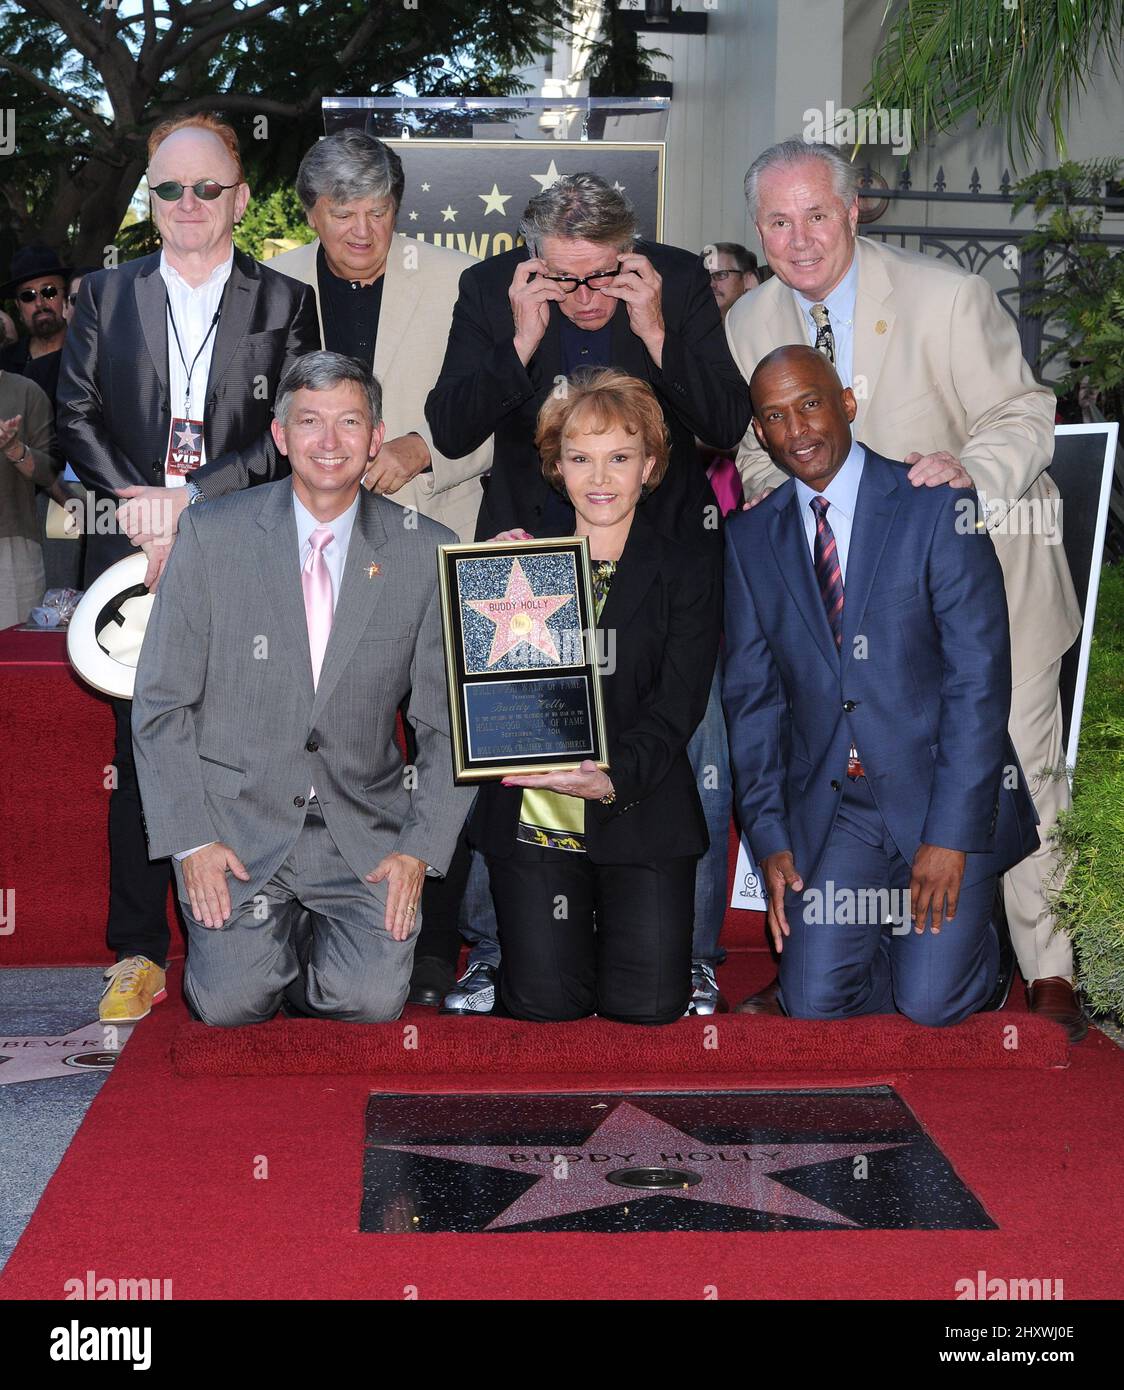 Peter Asher, Leron Gubler, Phil Everly, Gary Busey, Maria Elena Holly, Tom LaBonge and Marty Shelton pose as Buddy Holly is honored on the Hollywood Walk of Fame in front of the Capital Records Building, Hollywood, California on September 07, 2011. Stock Photo